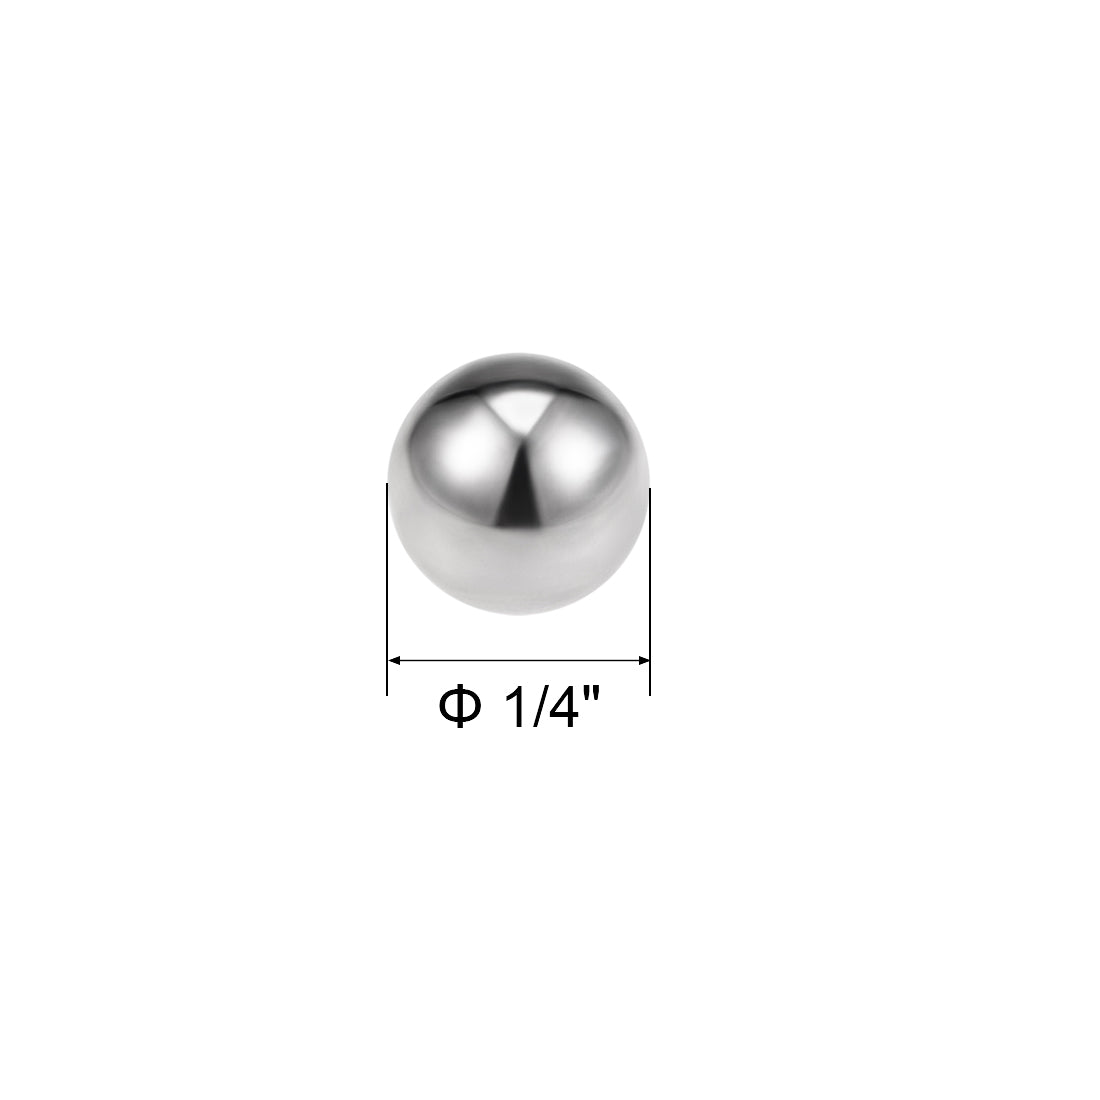 uxcell Uxcell Bearing Balls Inch 440C Stainless Steel G25 Precision Balls